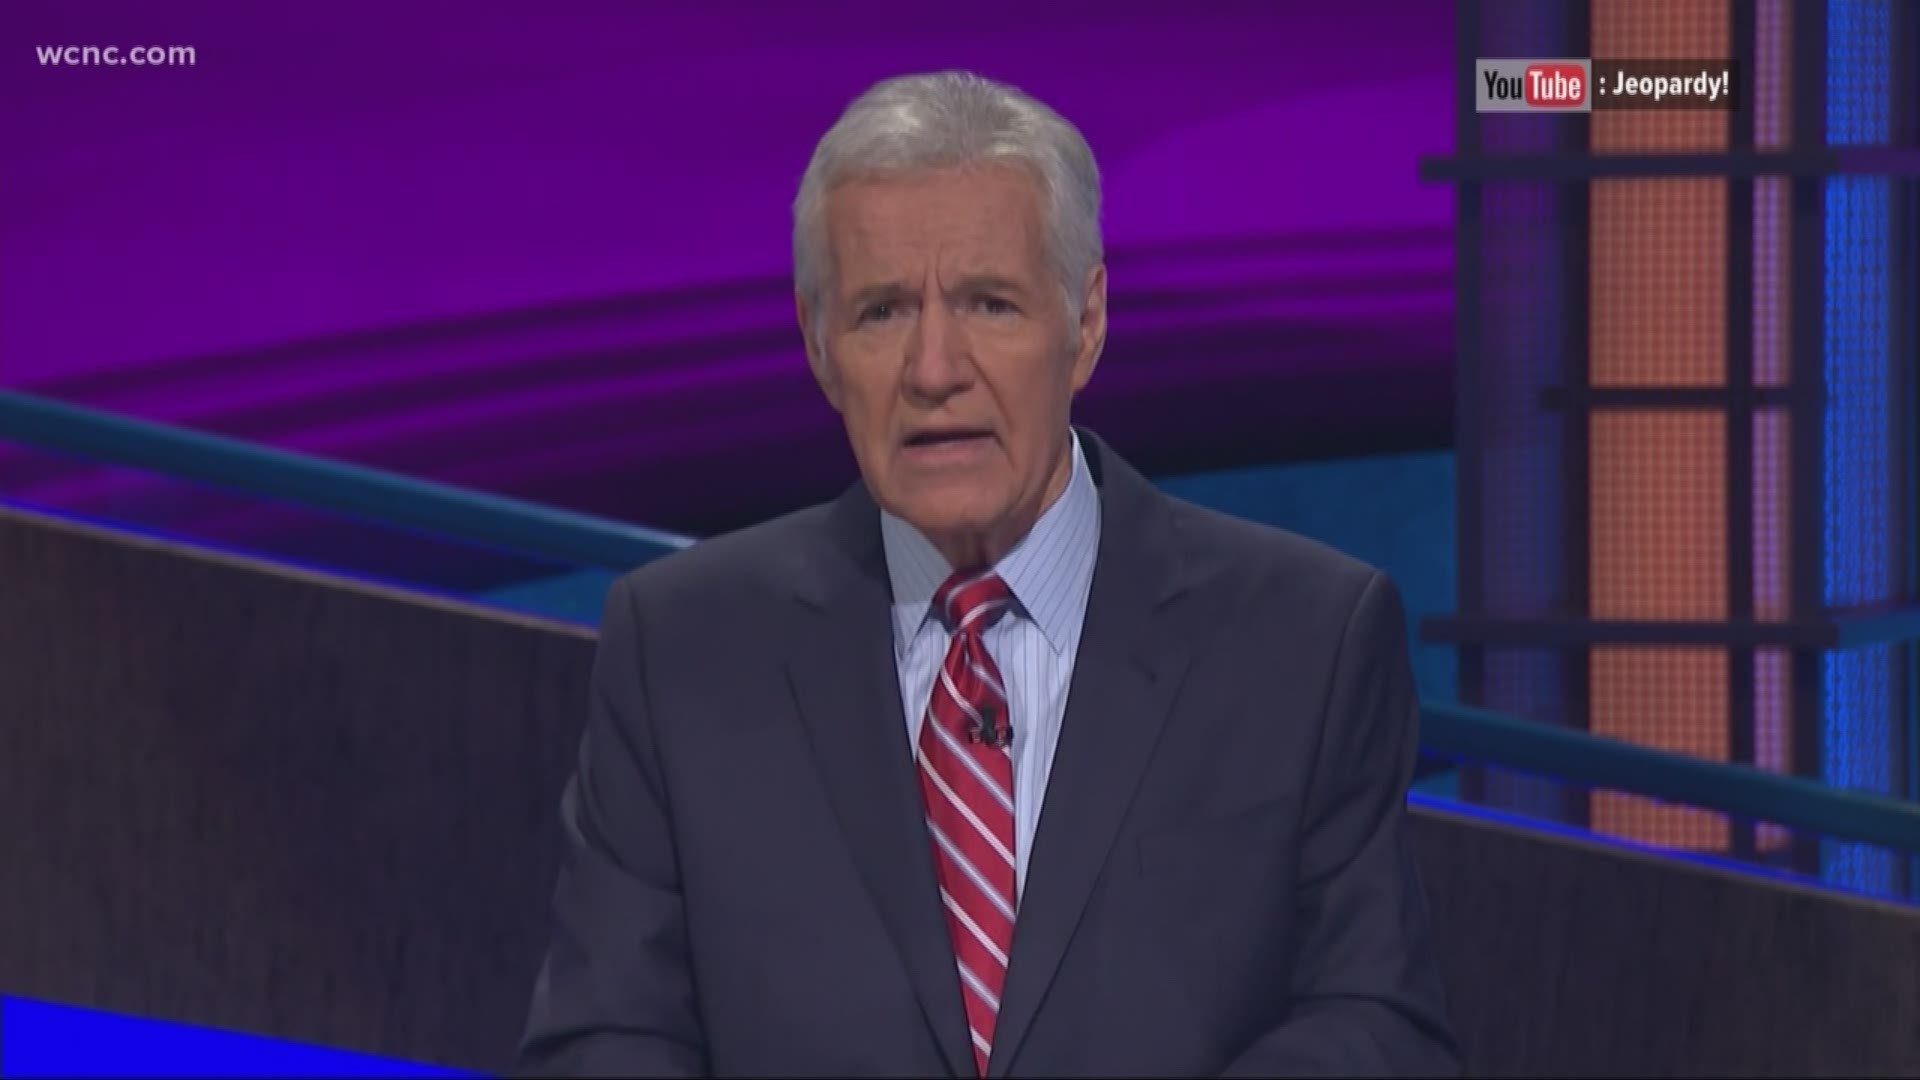 Wednesday evening, Trebek announced he was diagnosed with stage 4 pancreatic cancer. The harrowing diagnosis is all too familiar to so many.